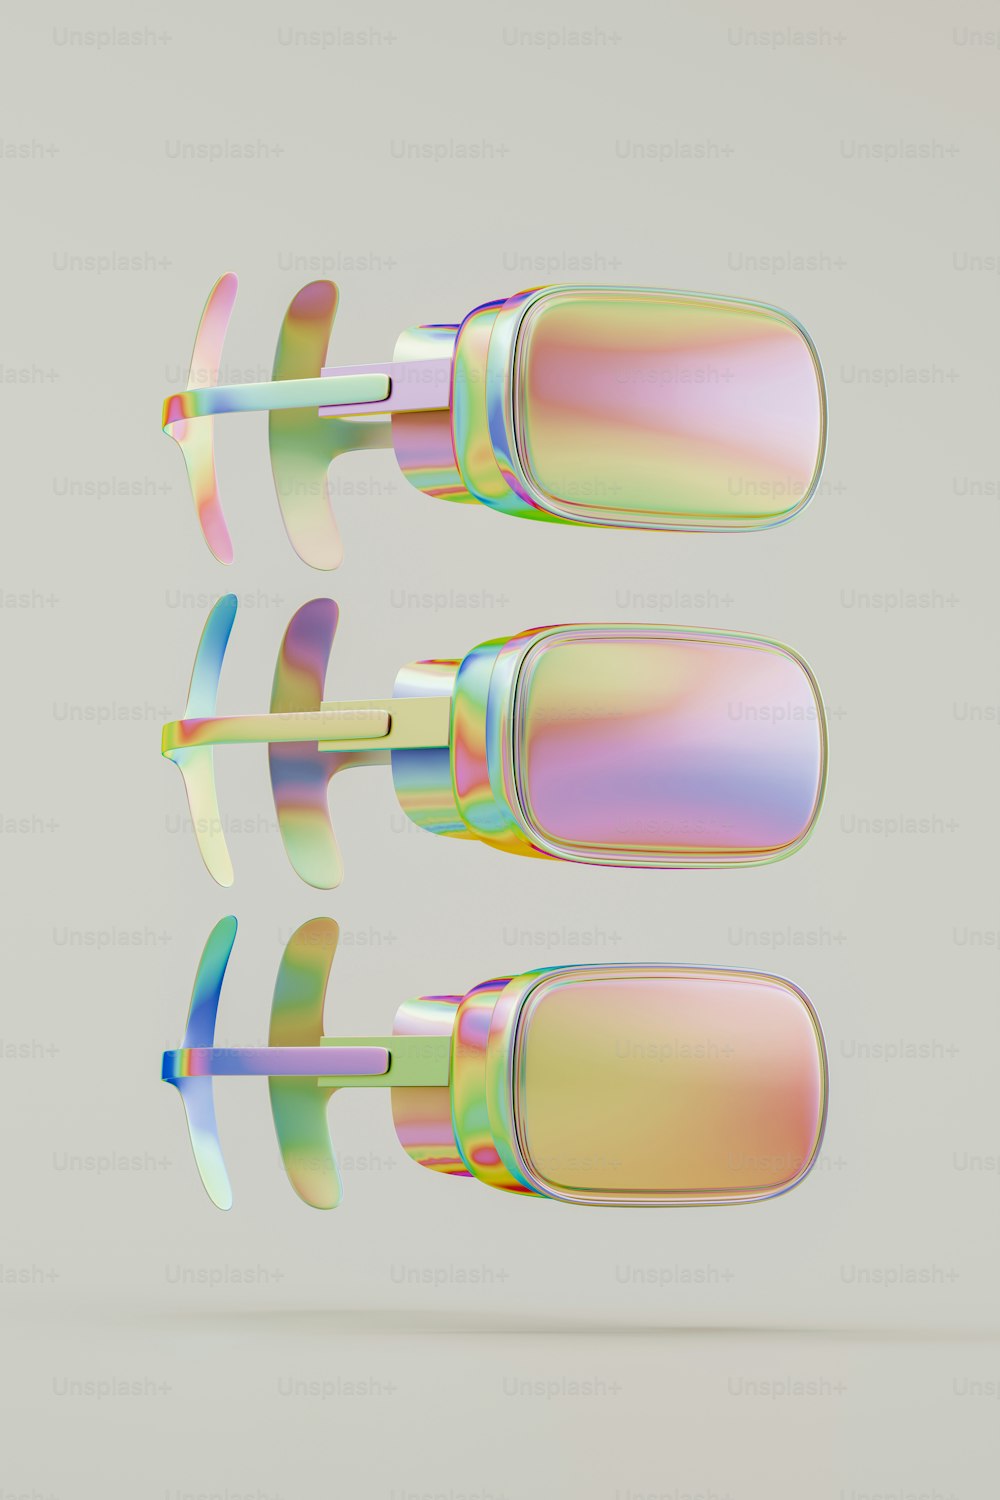 a pair of sunglasses with iridescent lenses are flying through the air